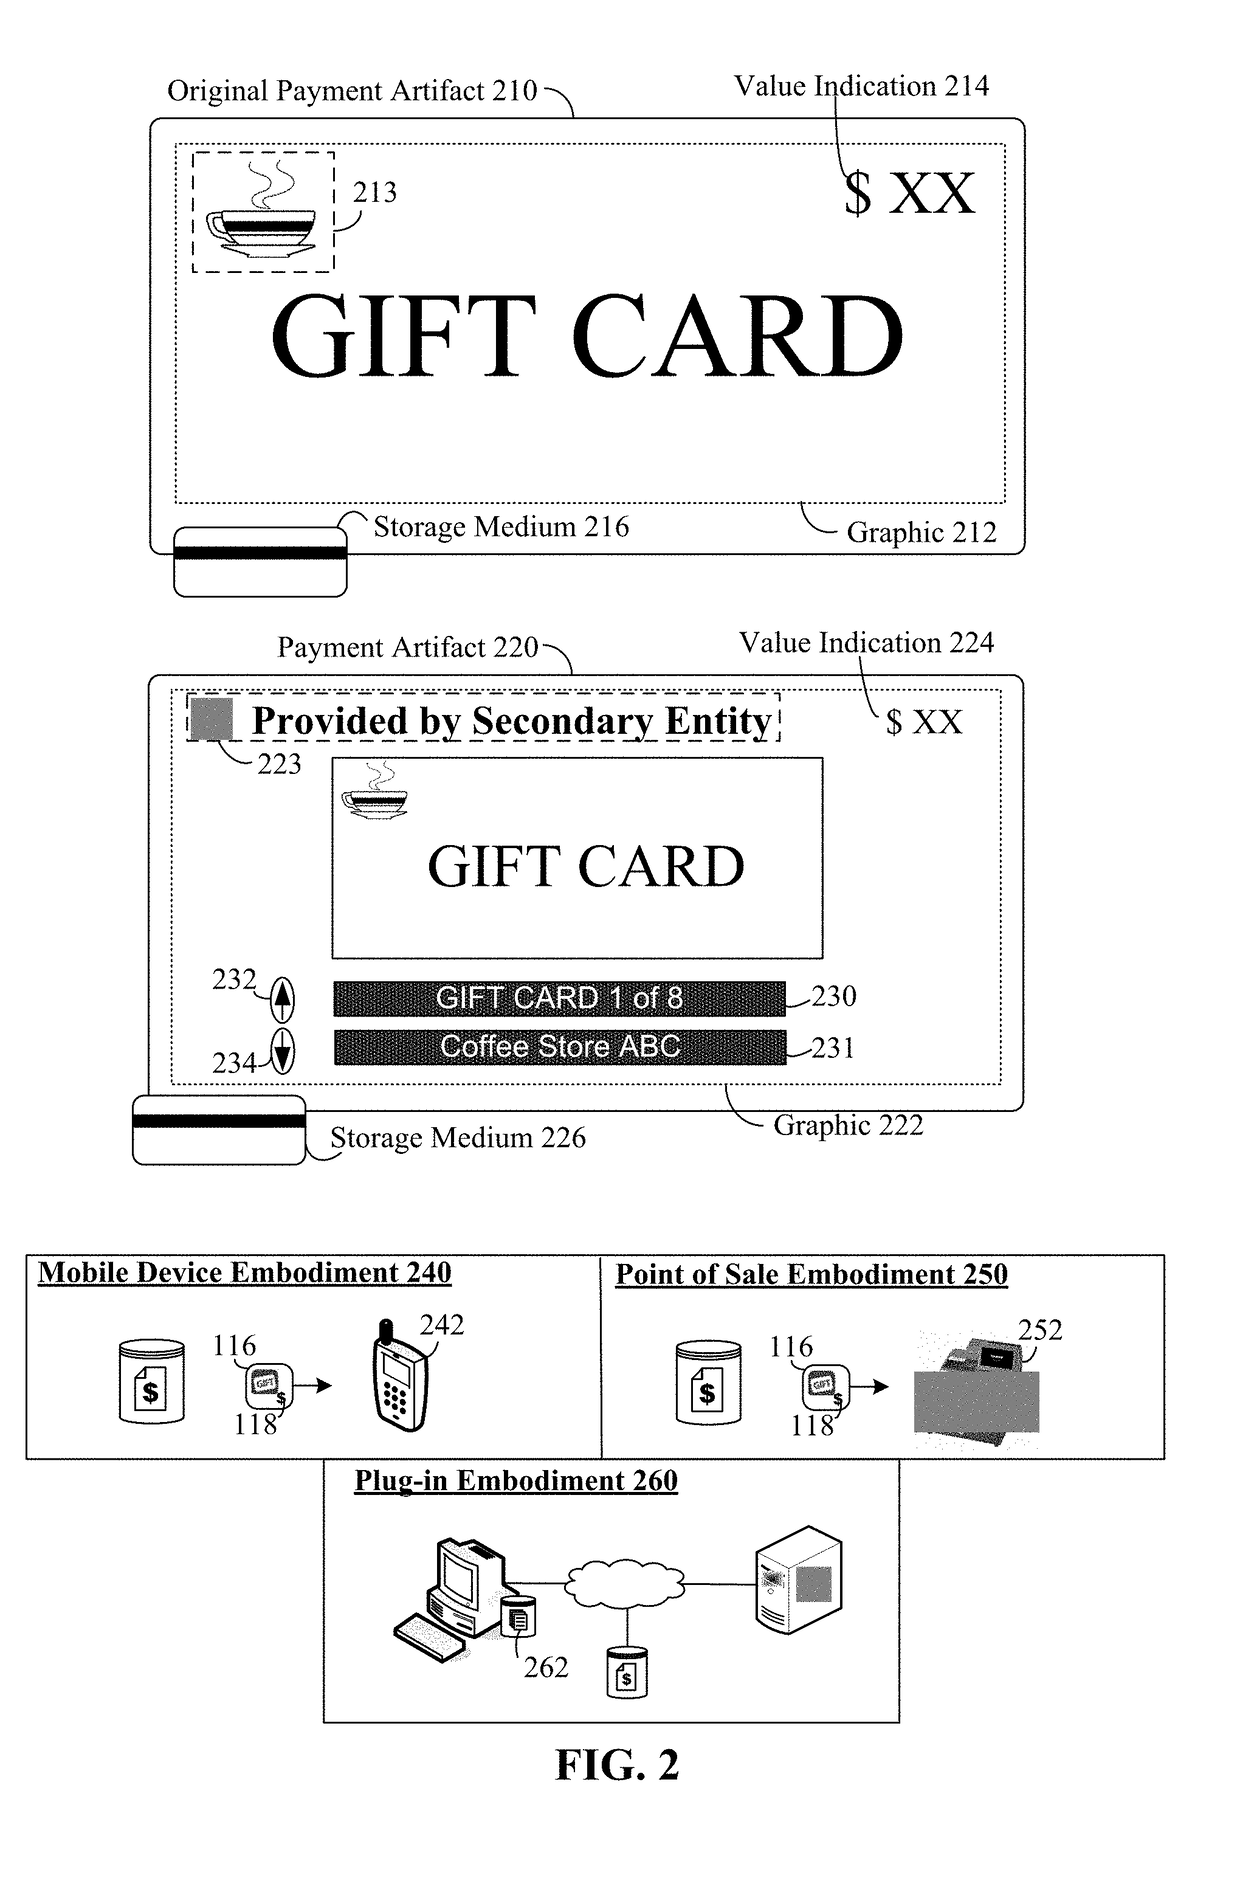 Secondary market for gift cards where secondary market transactions do not physically transfer the same gift card between a seller and a purchaser